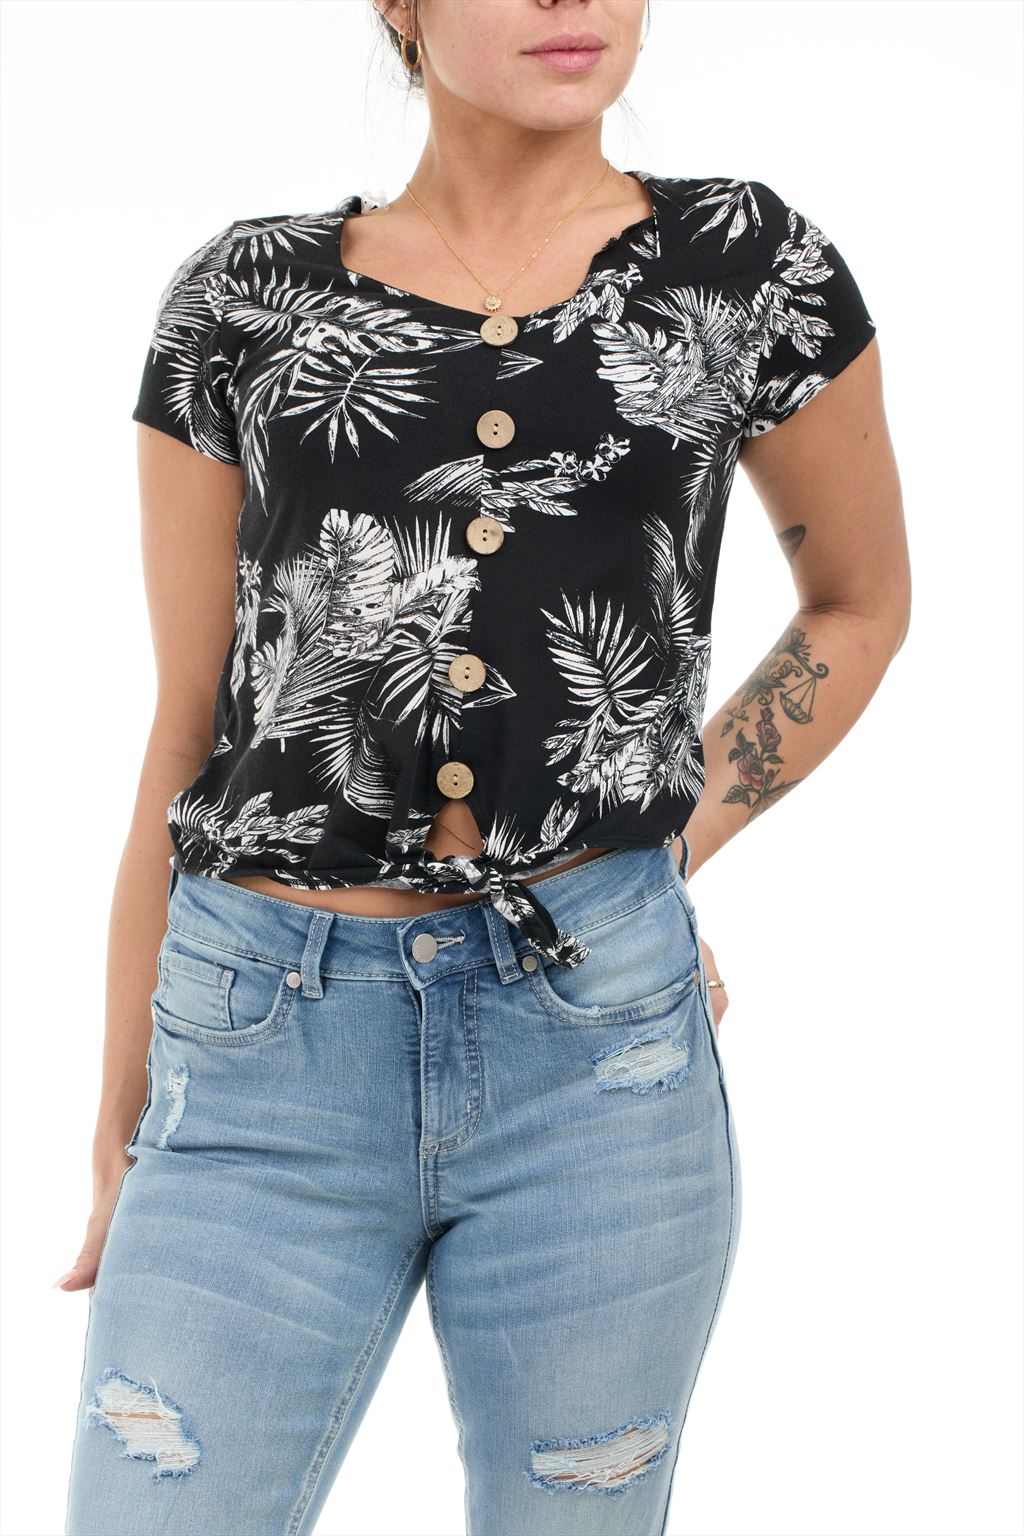 Printed blouse tied at the front